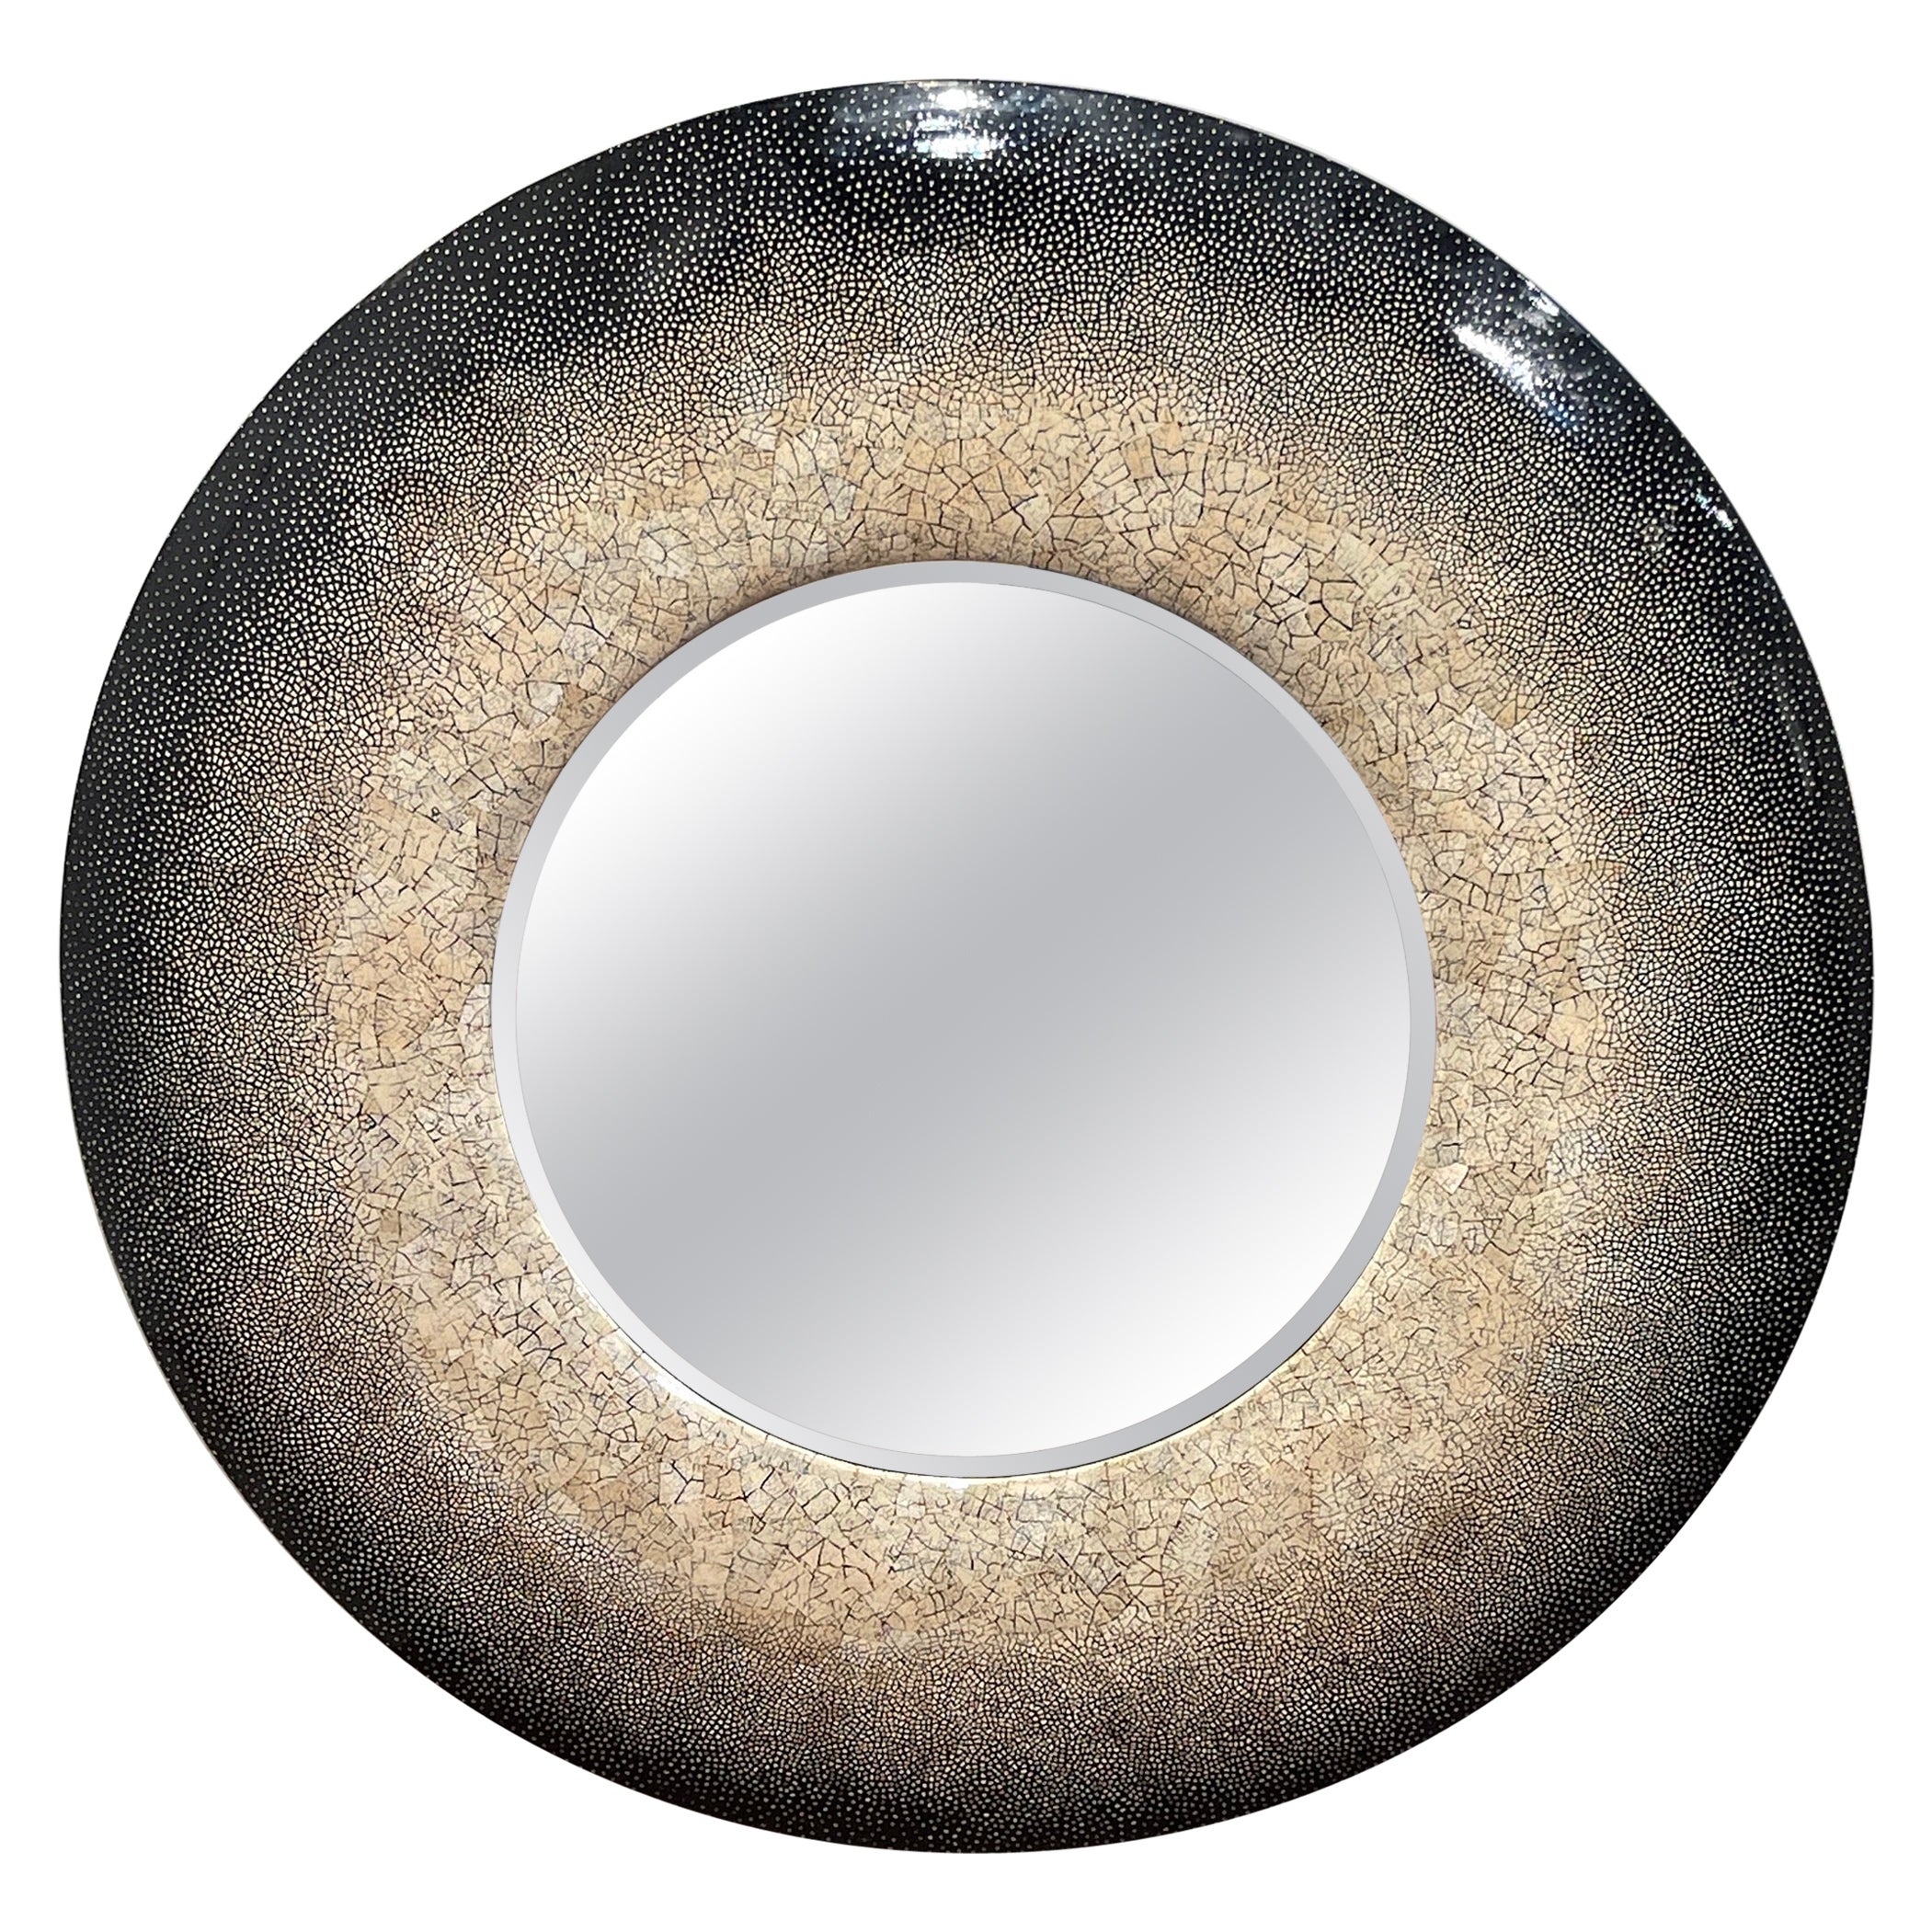 Large French Modern Style Lacquer and Eggshell Round Mirror For Sale